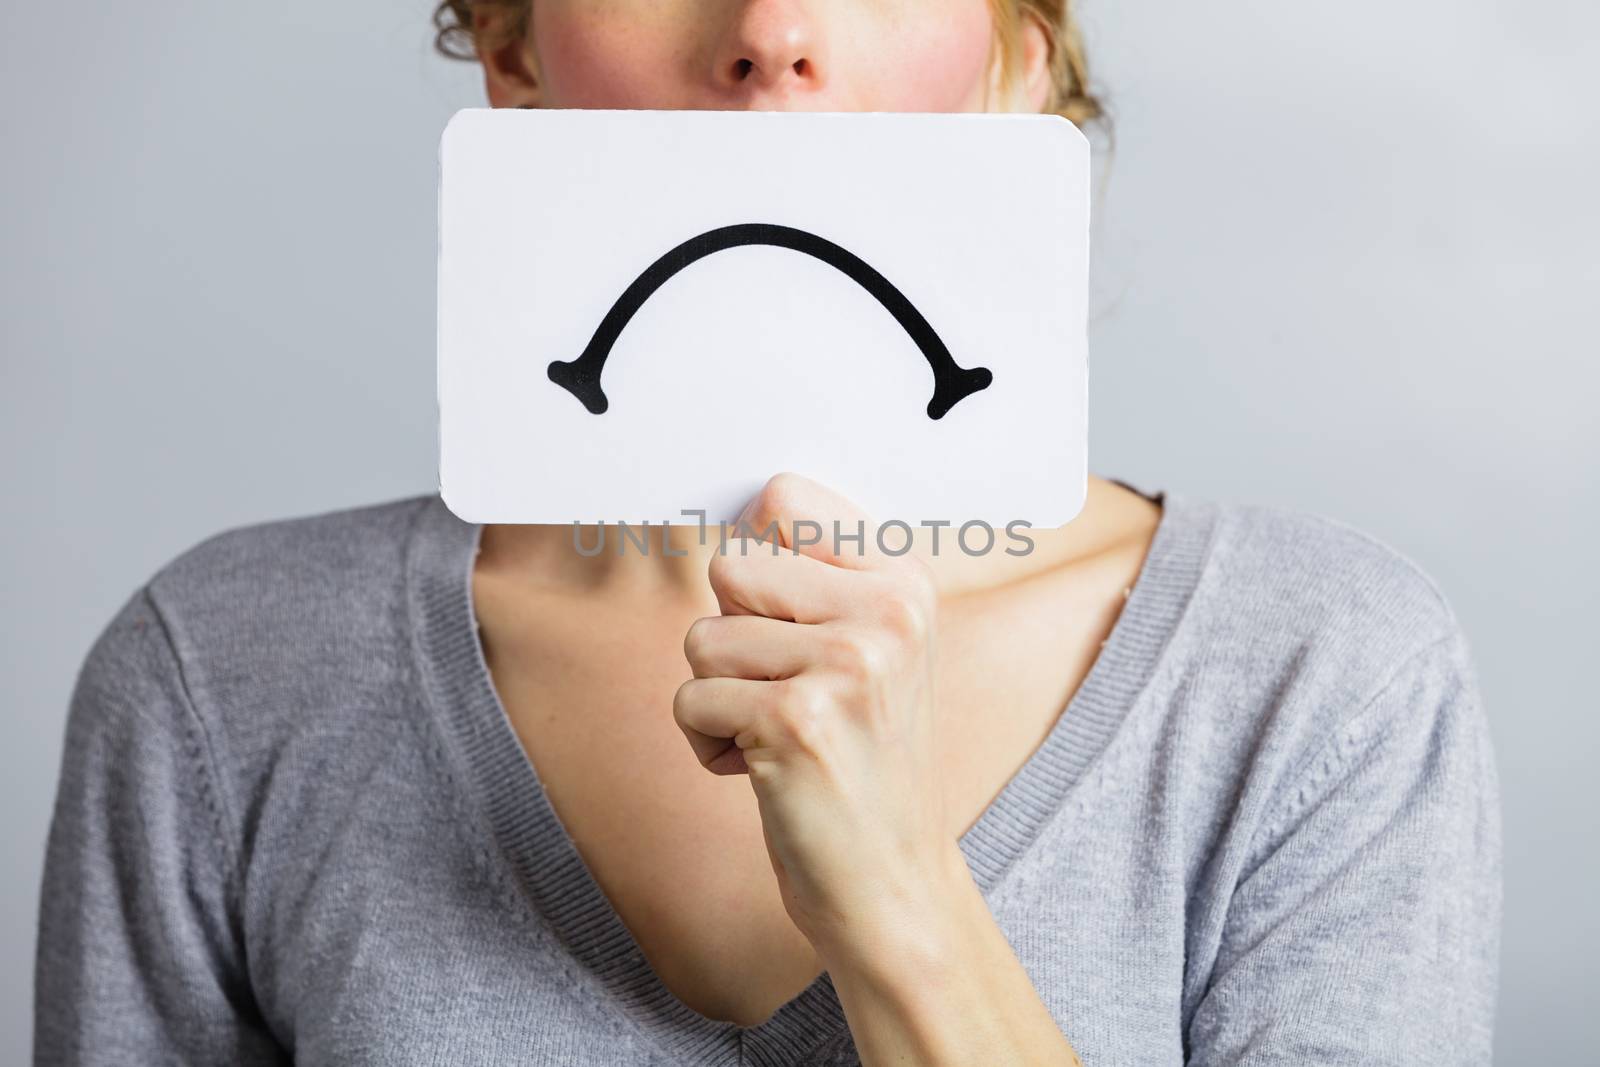 Unhappy Portrait of a Woman Holding a Sad Mood Board